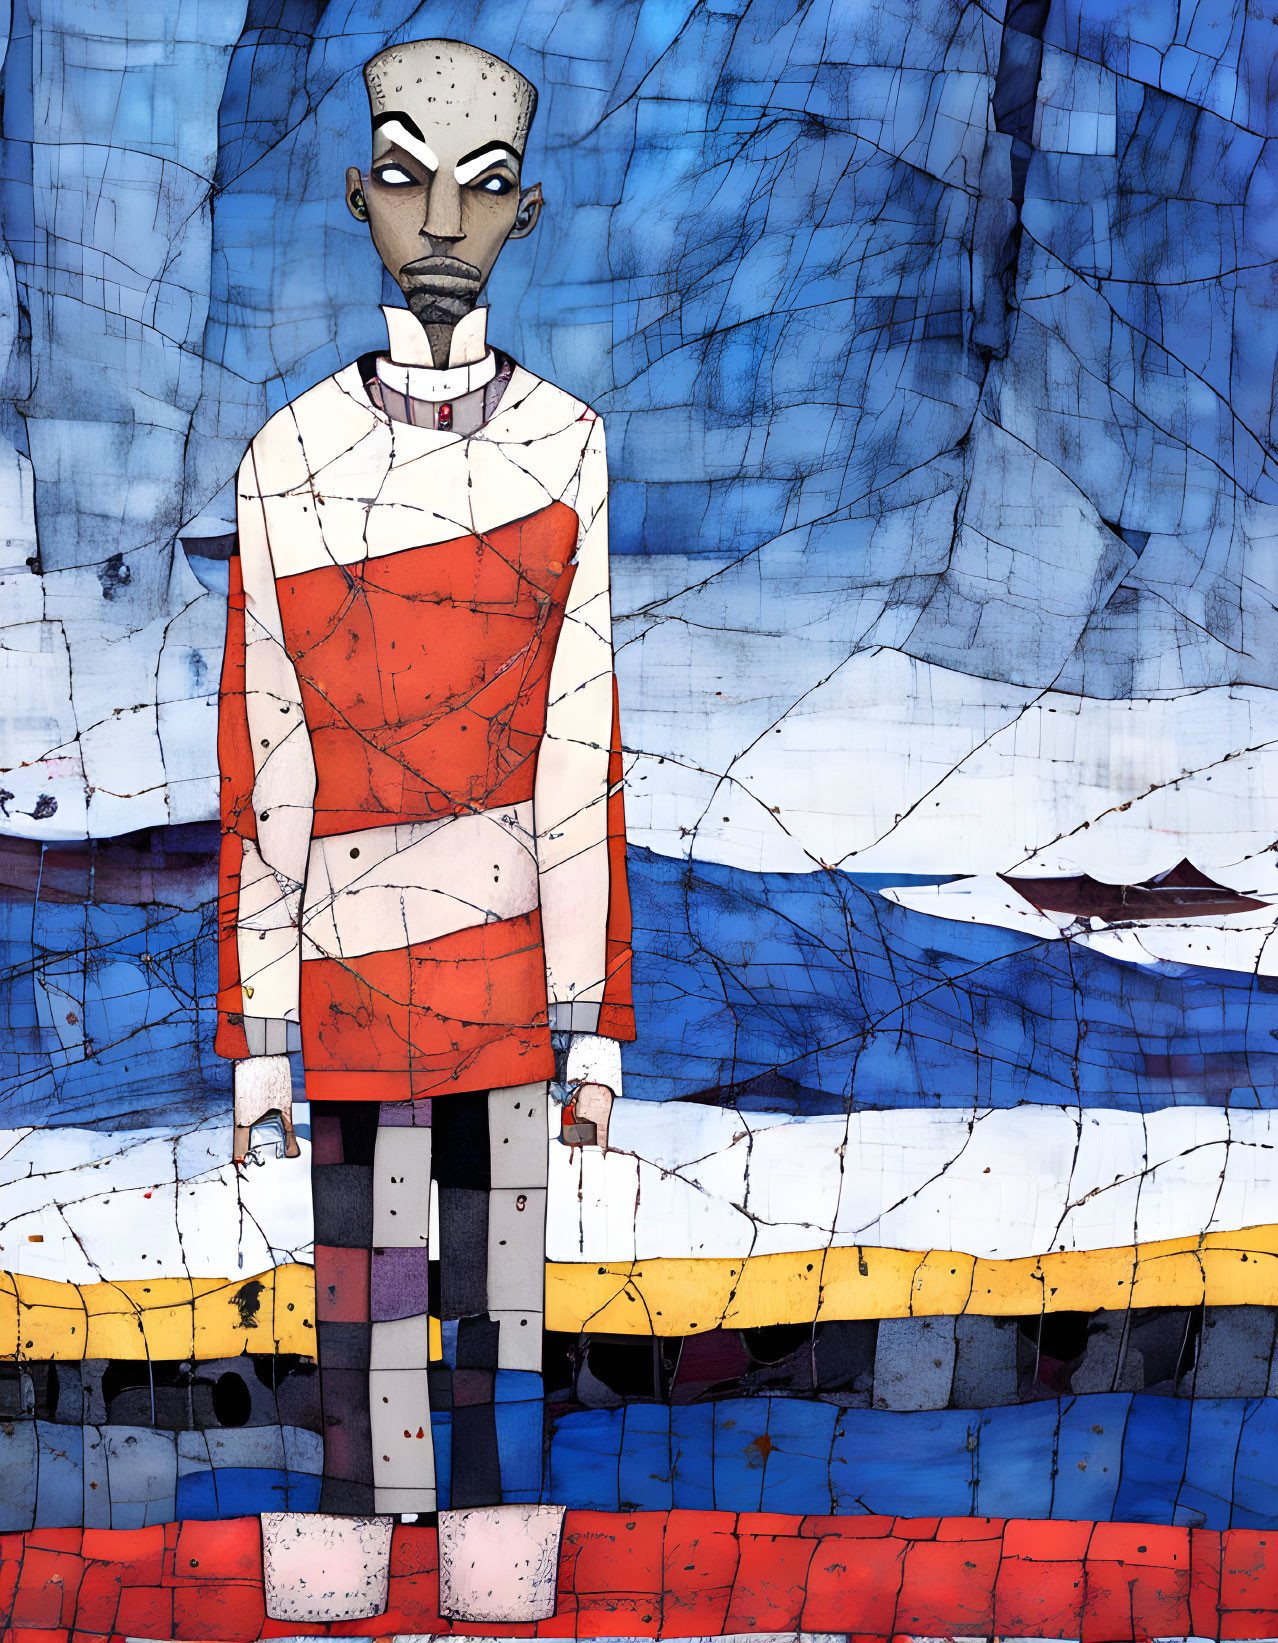 Stylized bald person in patchwork outfit on cracked blue background